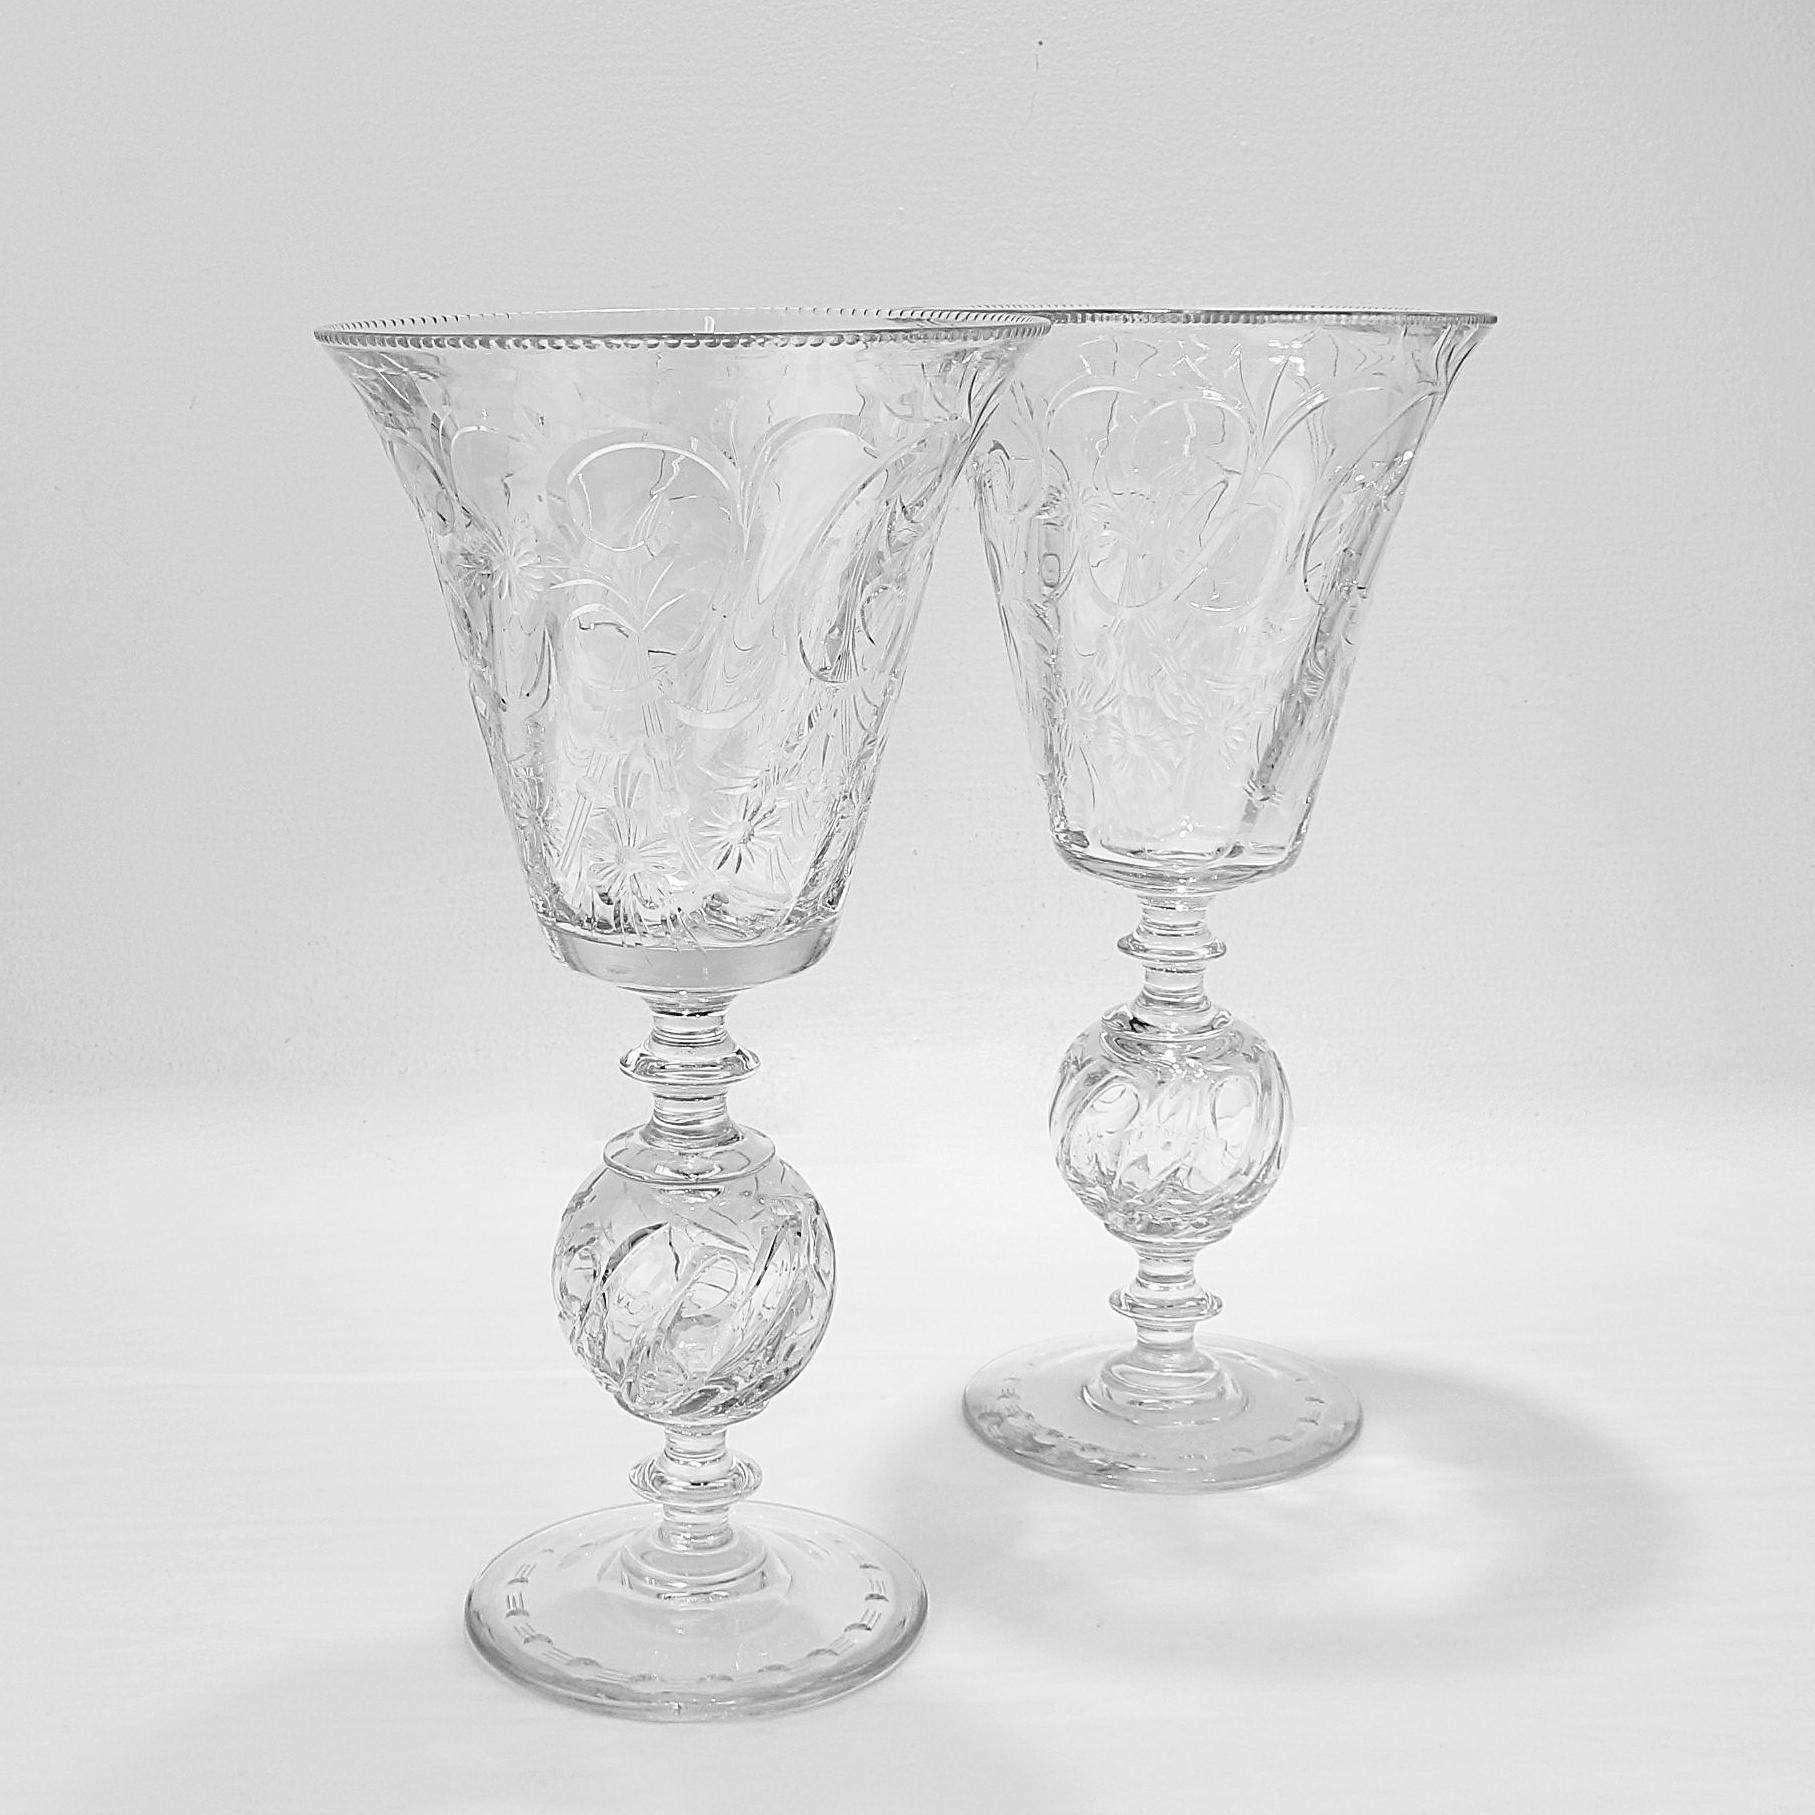 A fine pair of pairpoint footed vases.

In the Ardsley pattern with a 